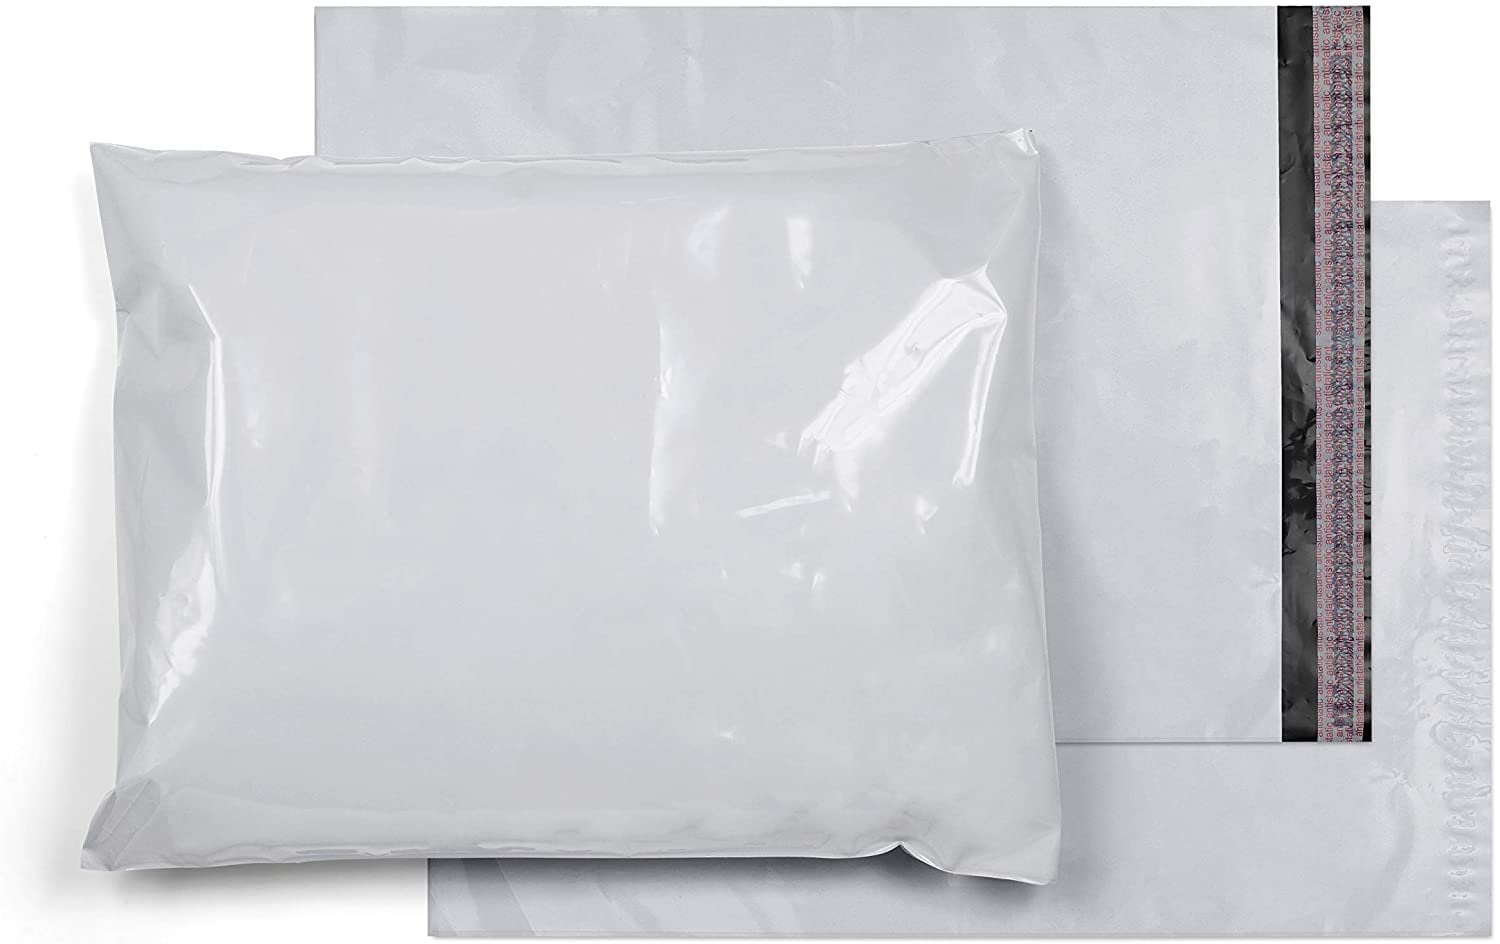 30 Poly Mailers size 9" x 12" Shipping Bags Plastic Mailing Envelopes USPS White 